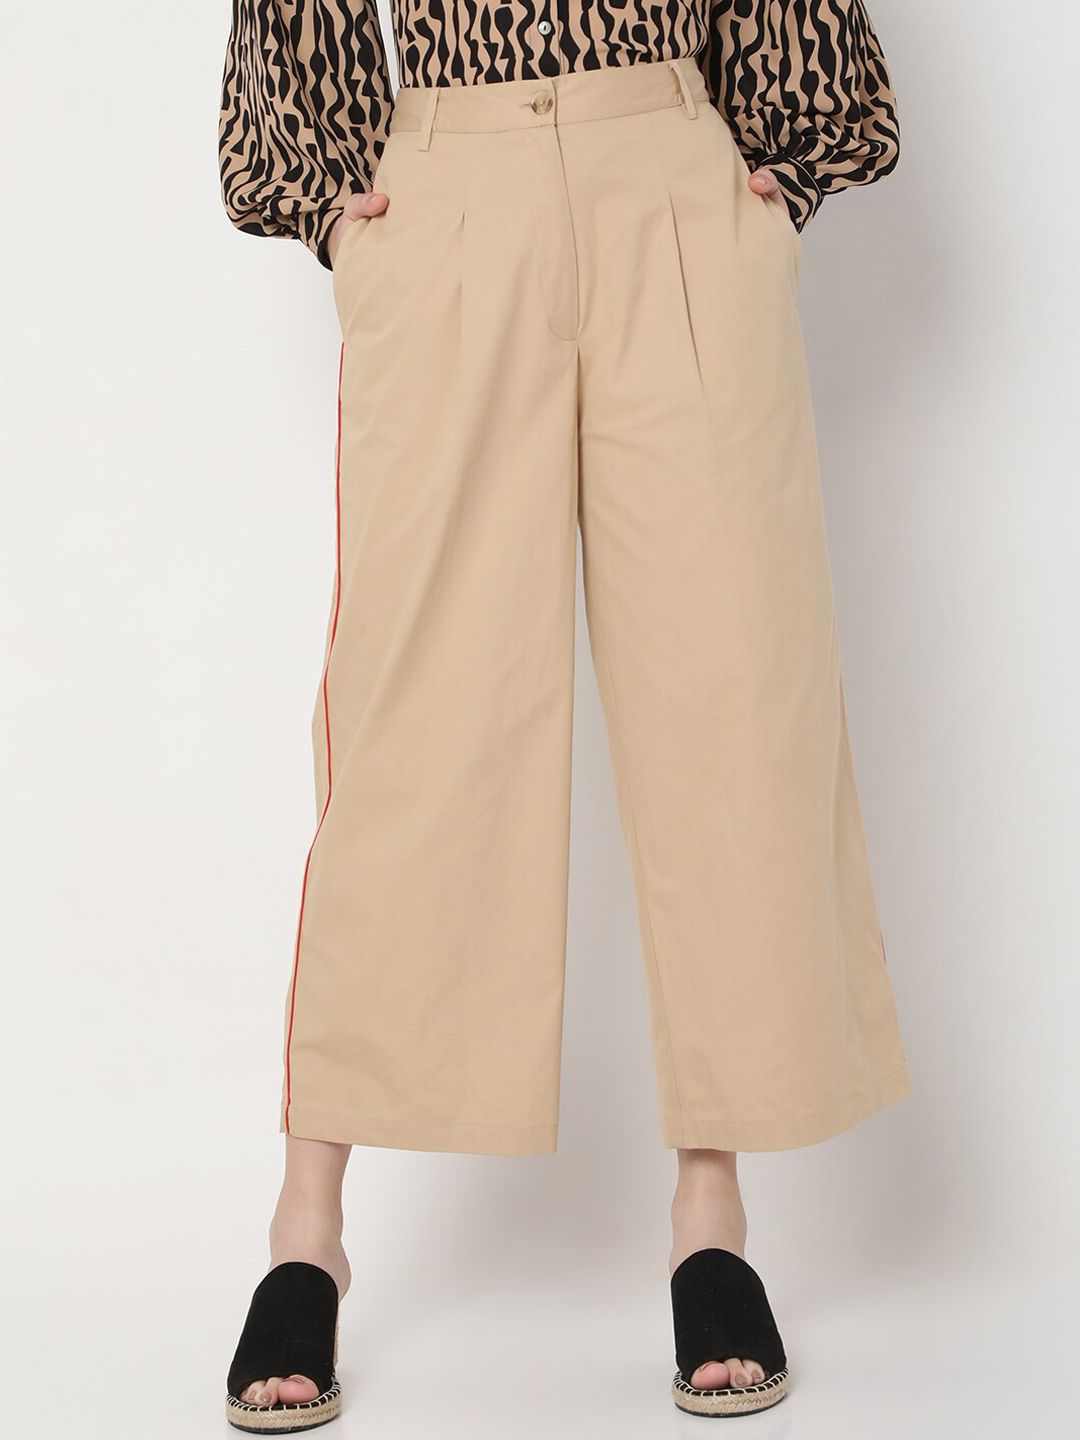 Vero Moda Women Brown High-Rise Pleated Trousers Price in India